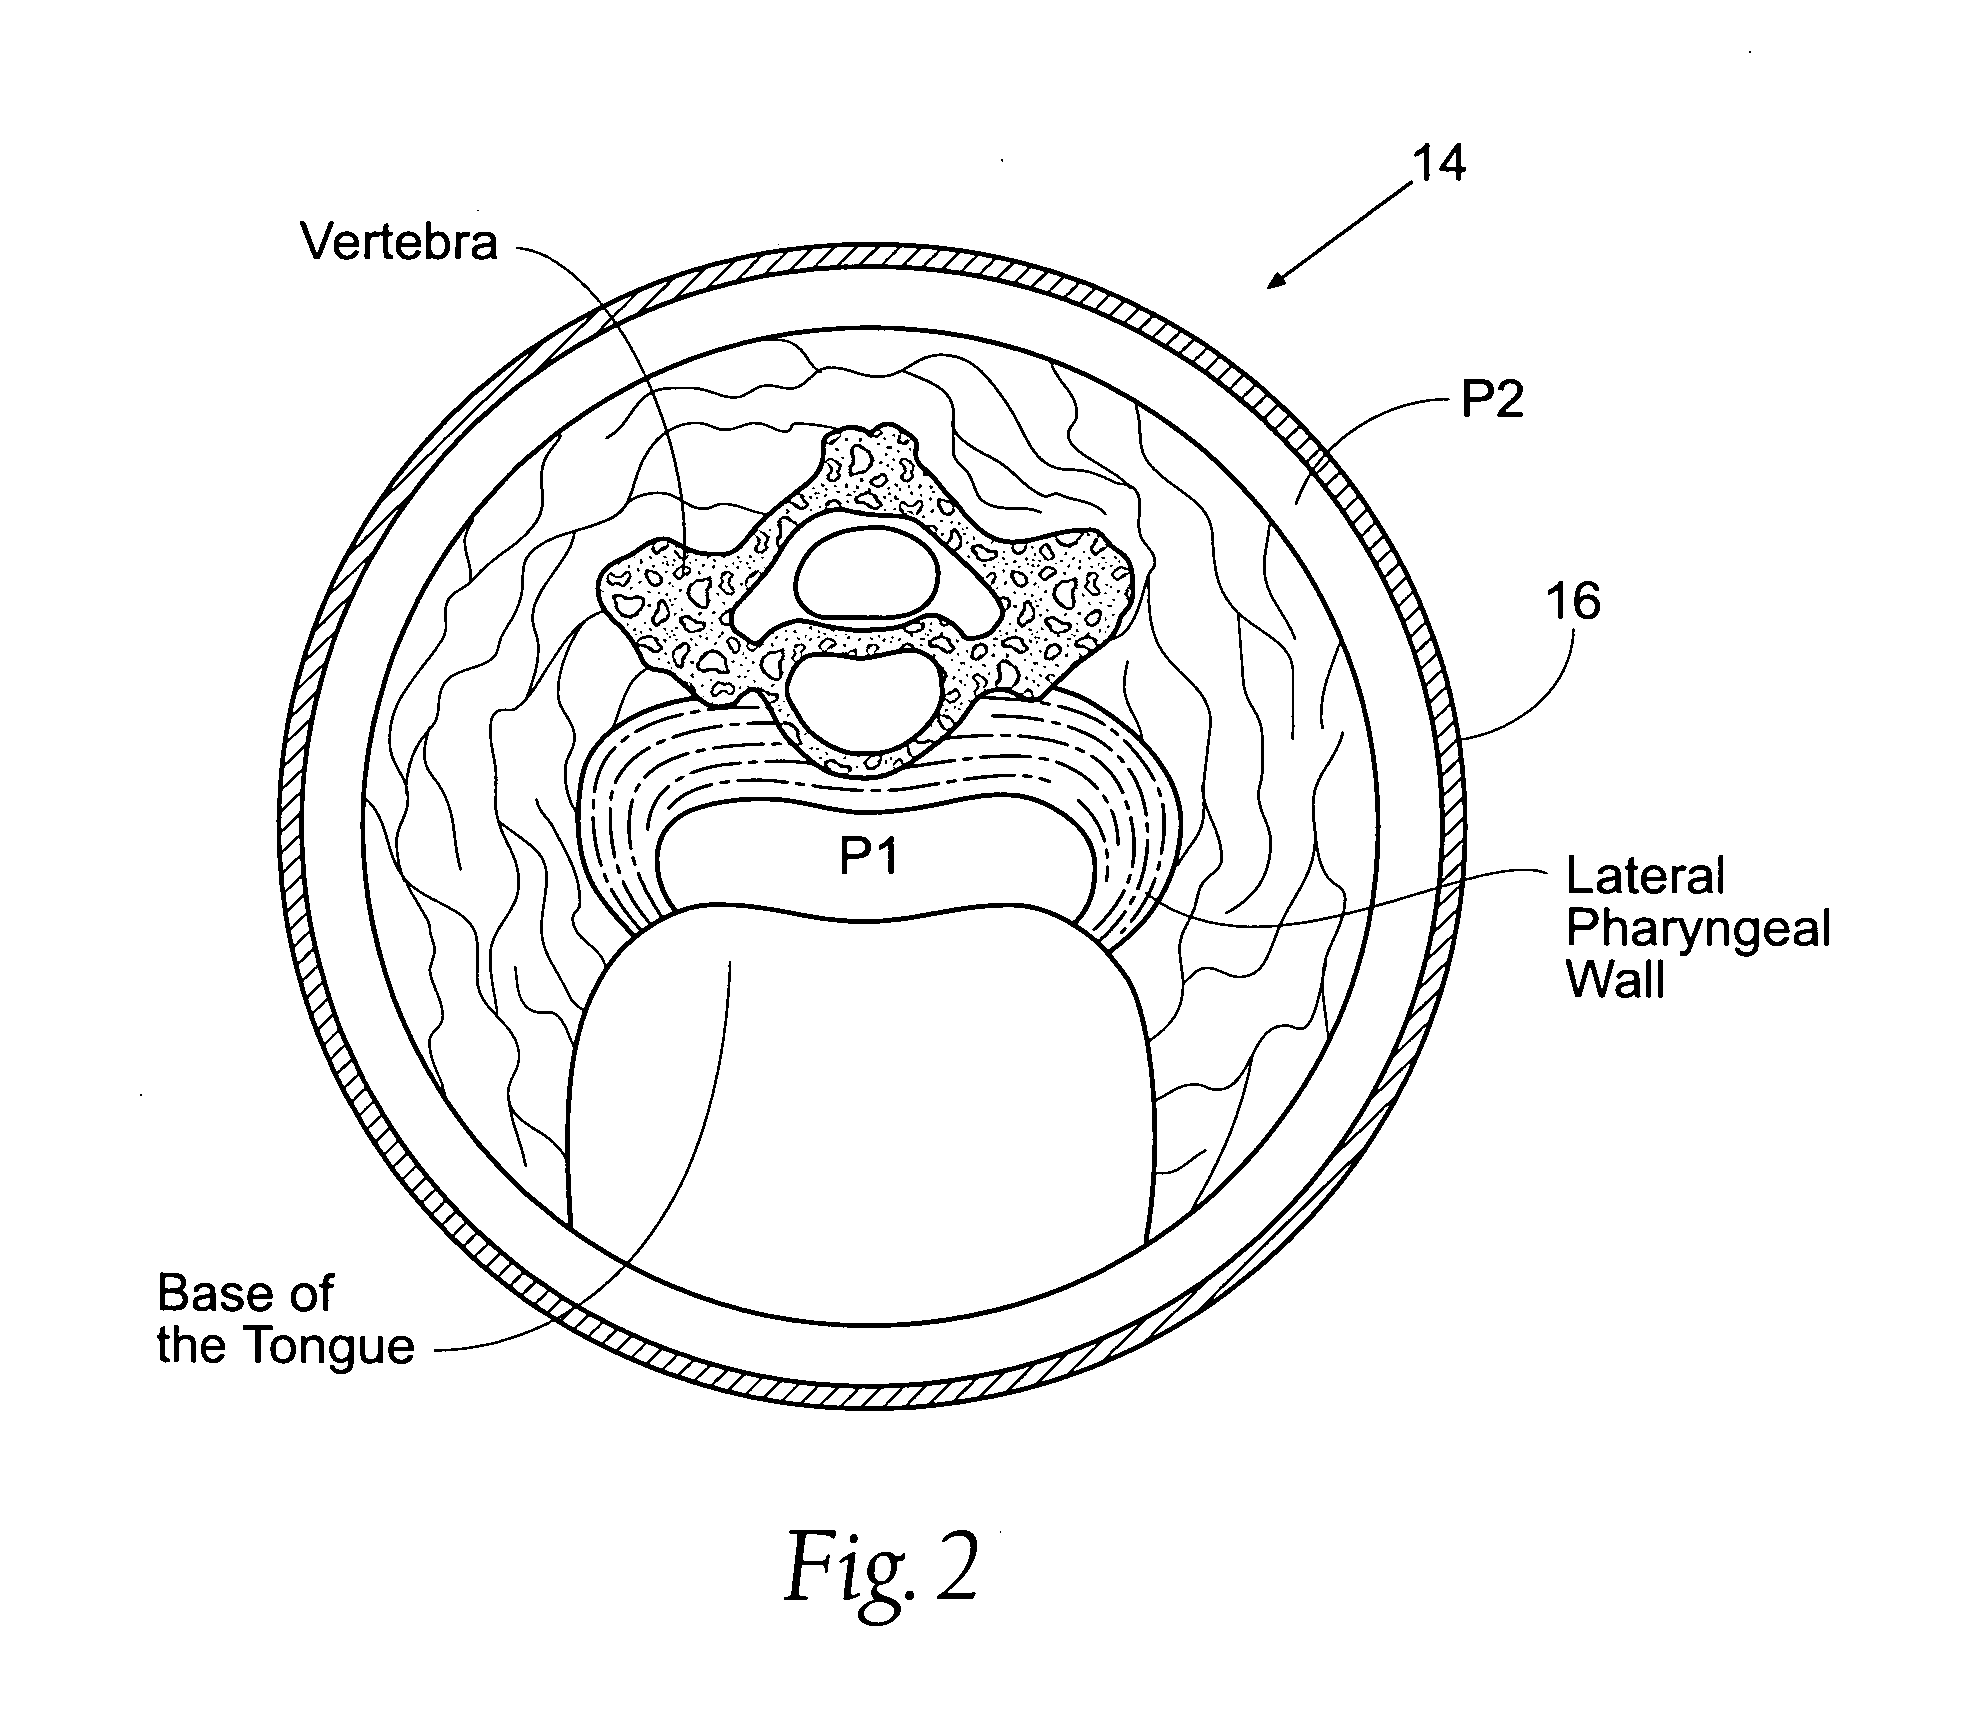 Devices, systems, and methods to fixate tissue within the regions of body, such as the pharyngeal conduit